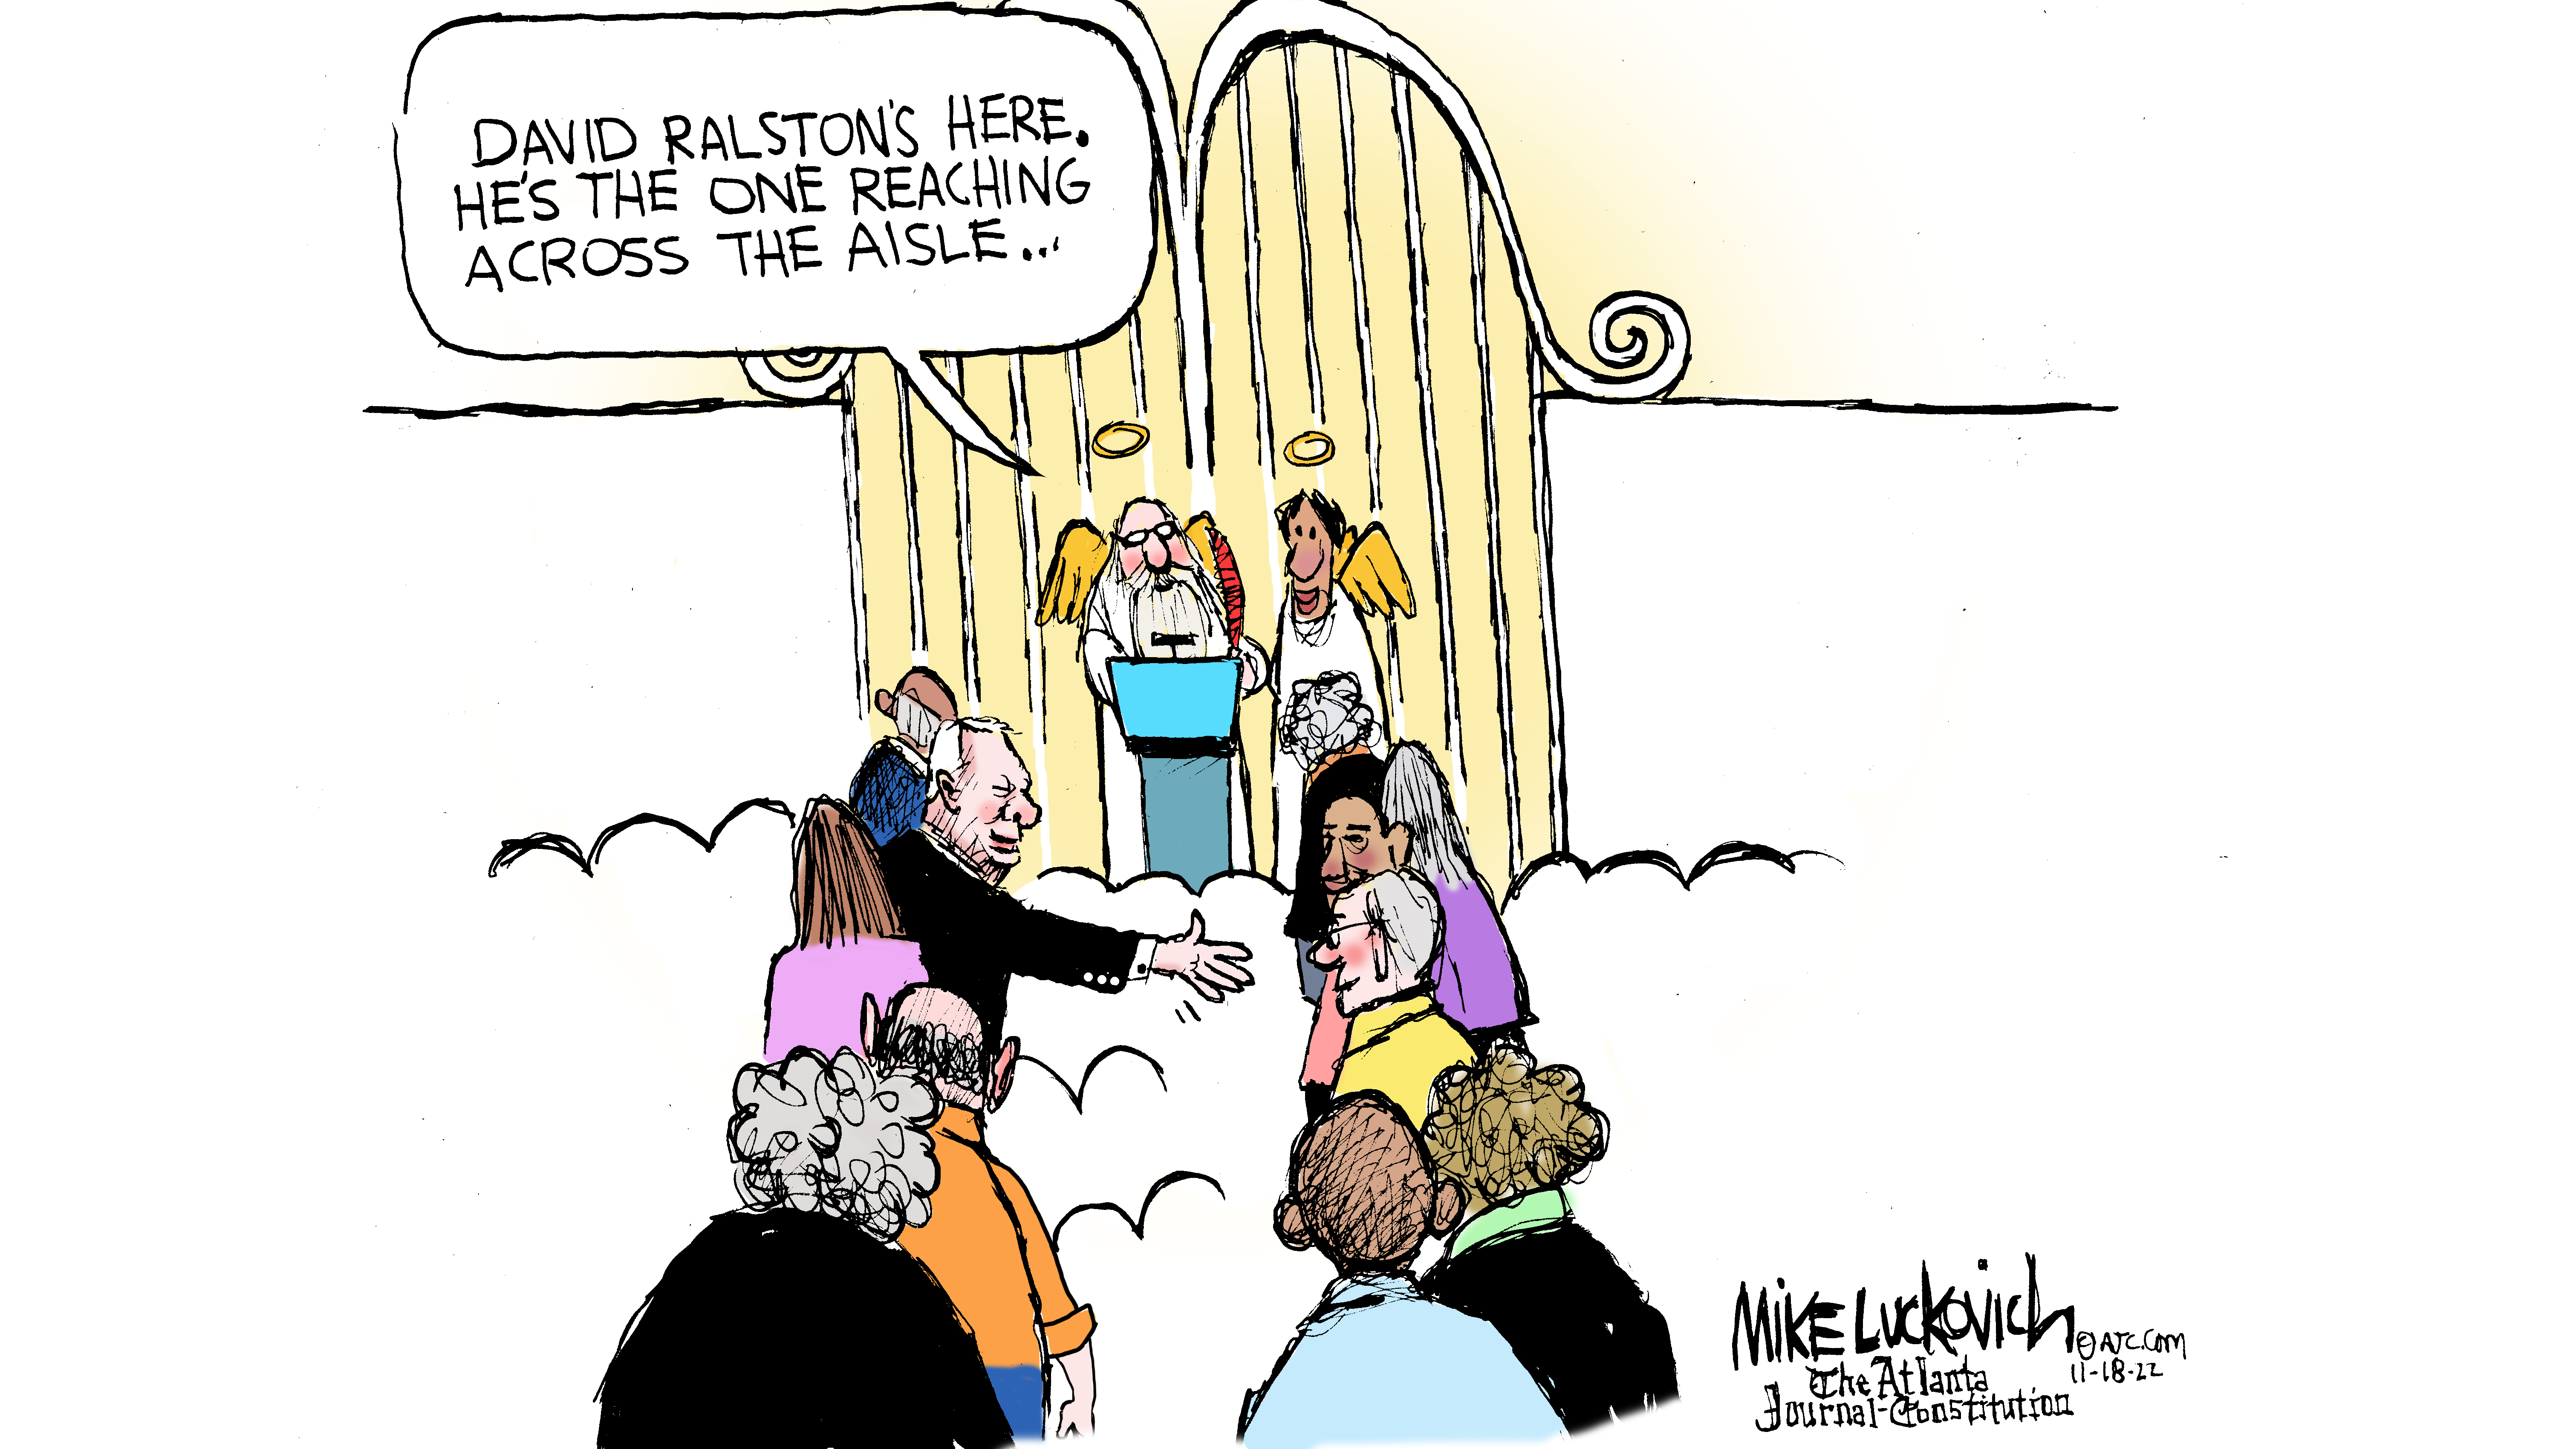 11/18 Mike Luckovich: Pearly Gates common ground